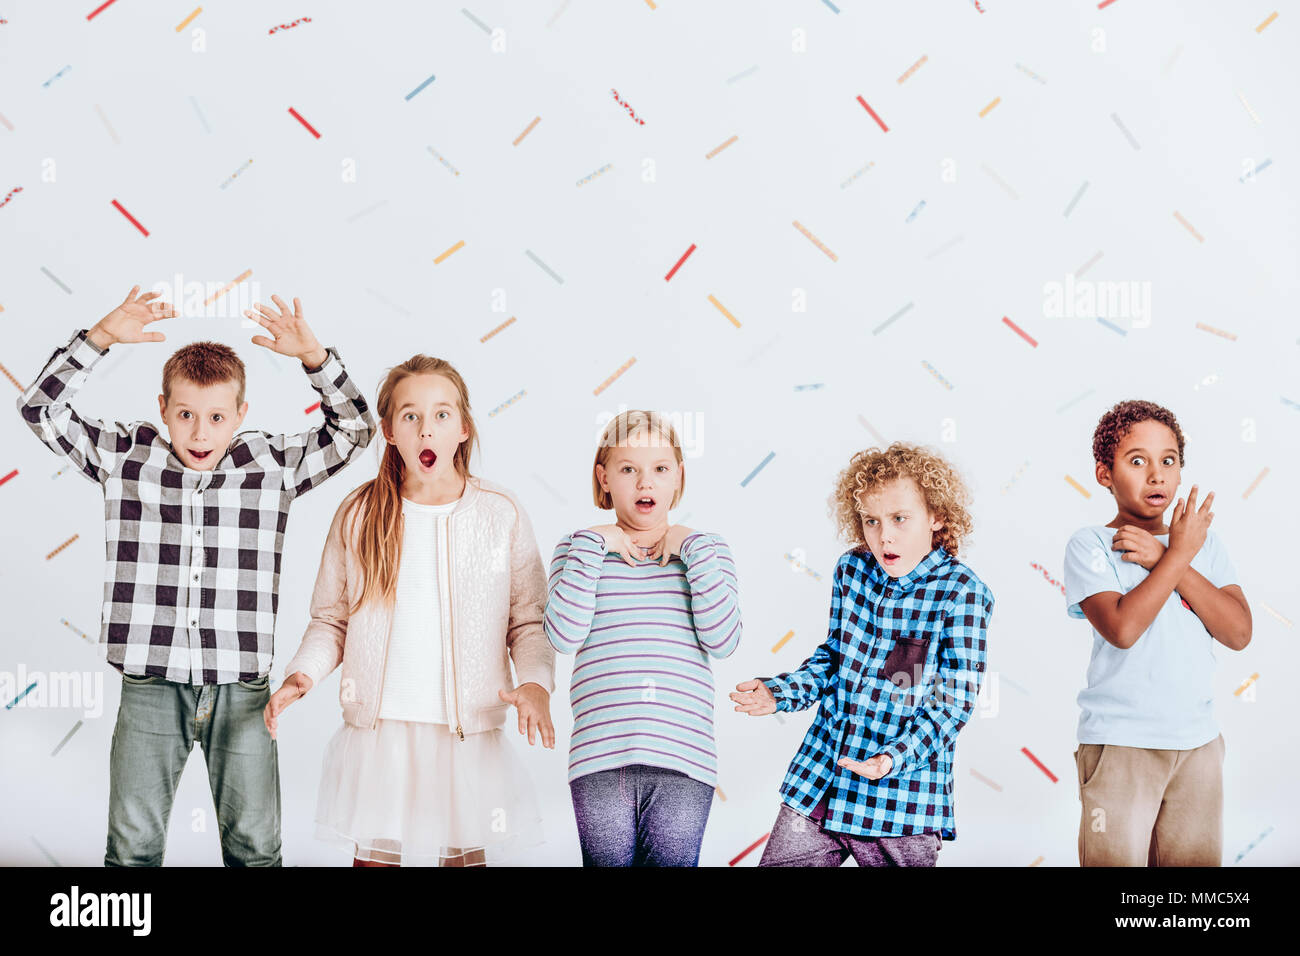 Group of surprised kids standing in a room Stock Photo